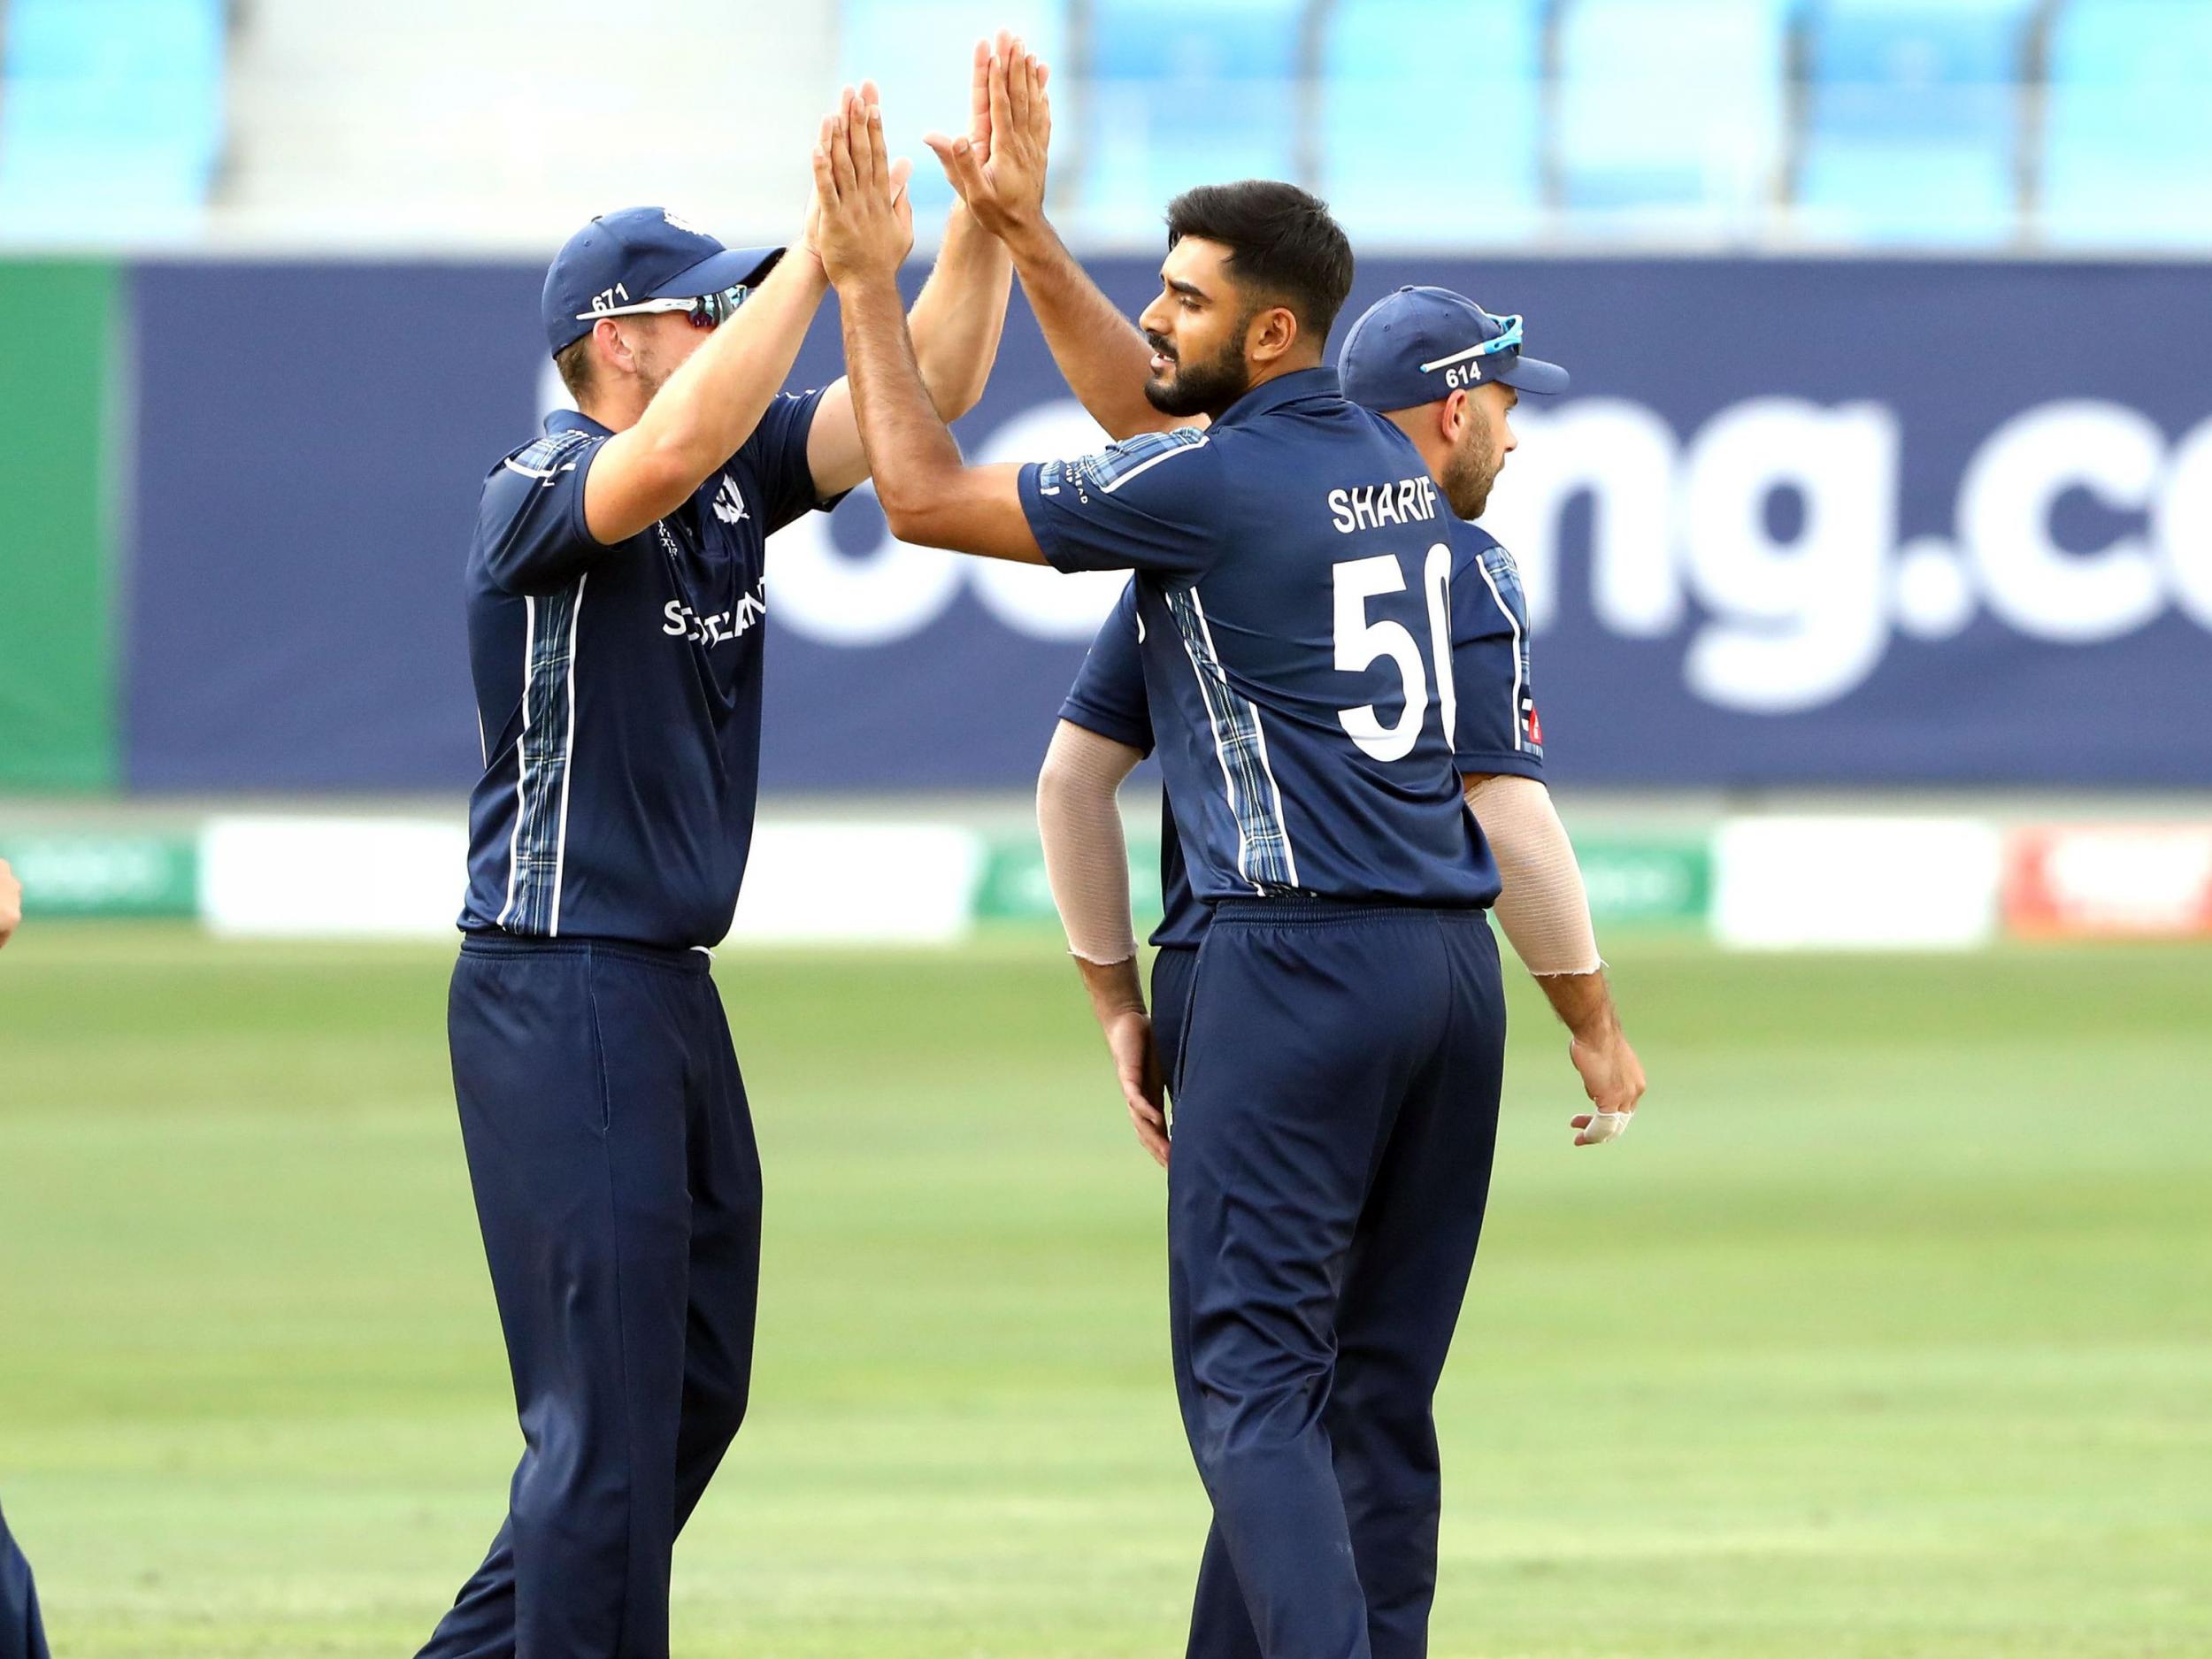 Scotland qualified for the T20 World Cup after beating the UAE